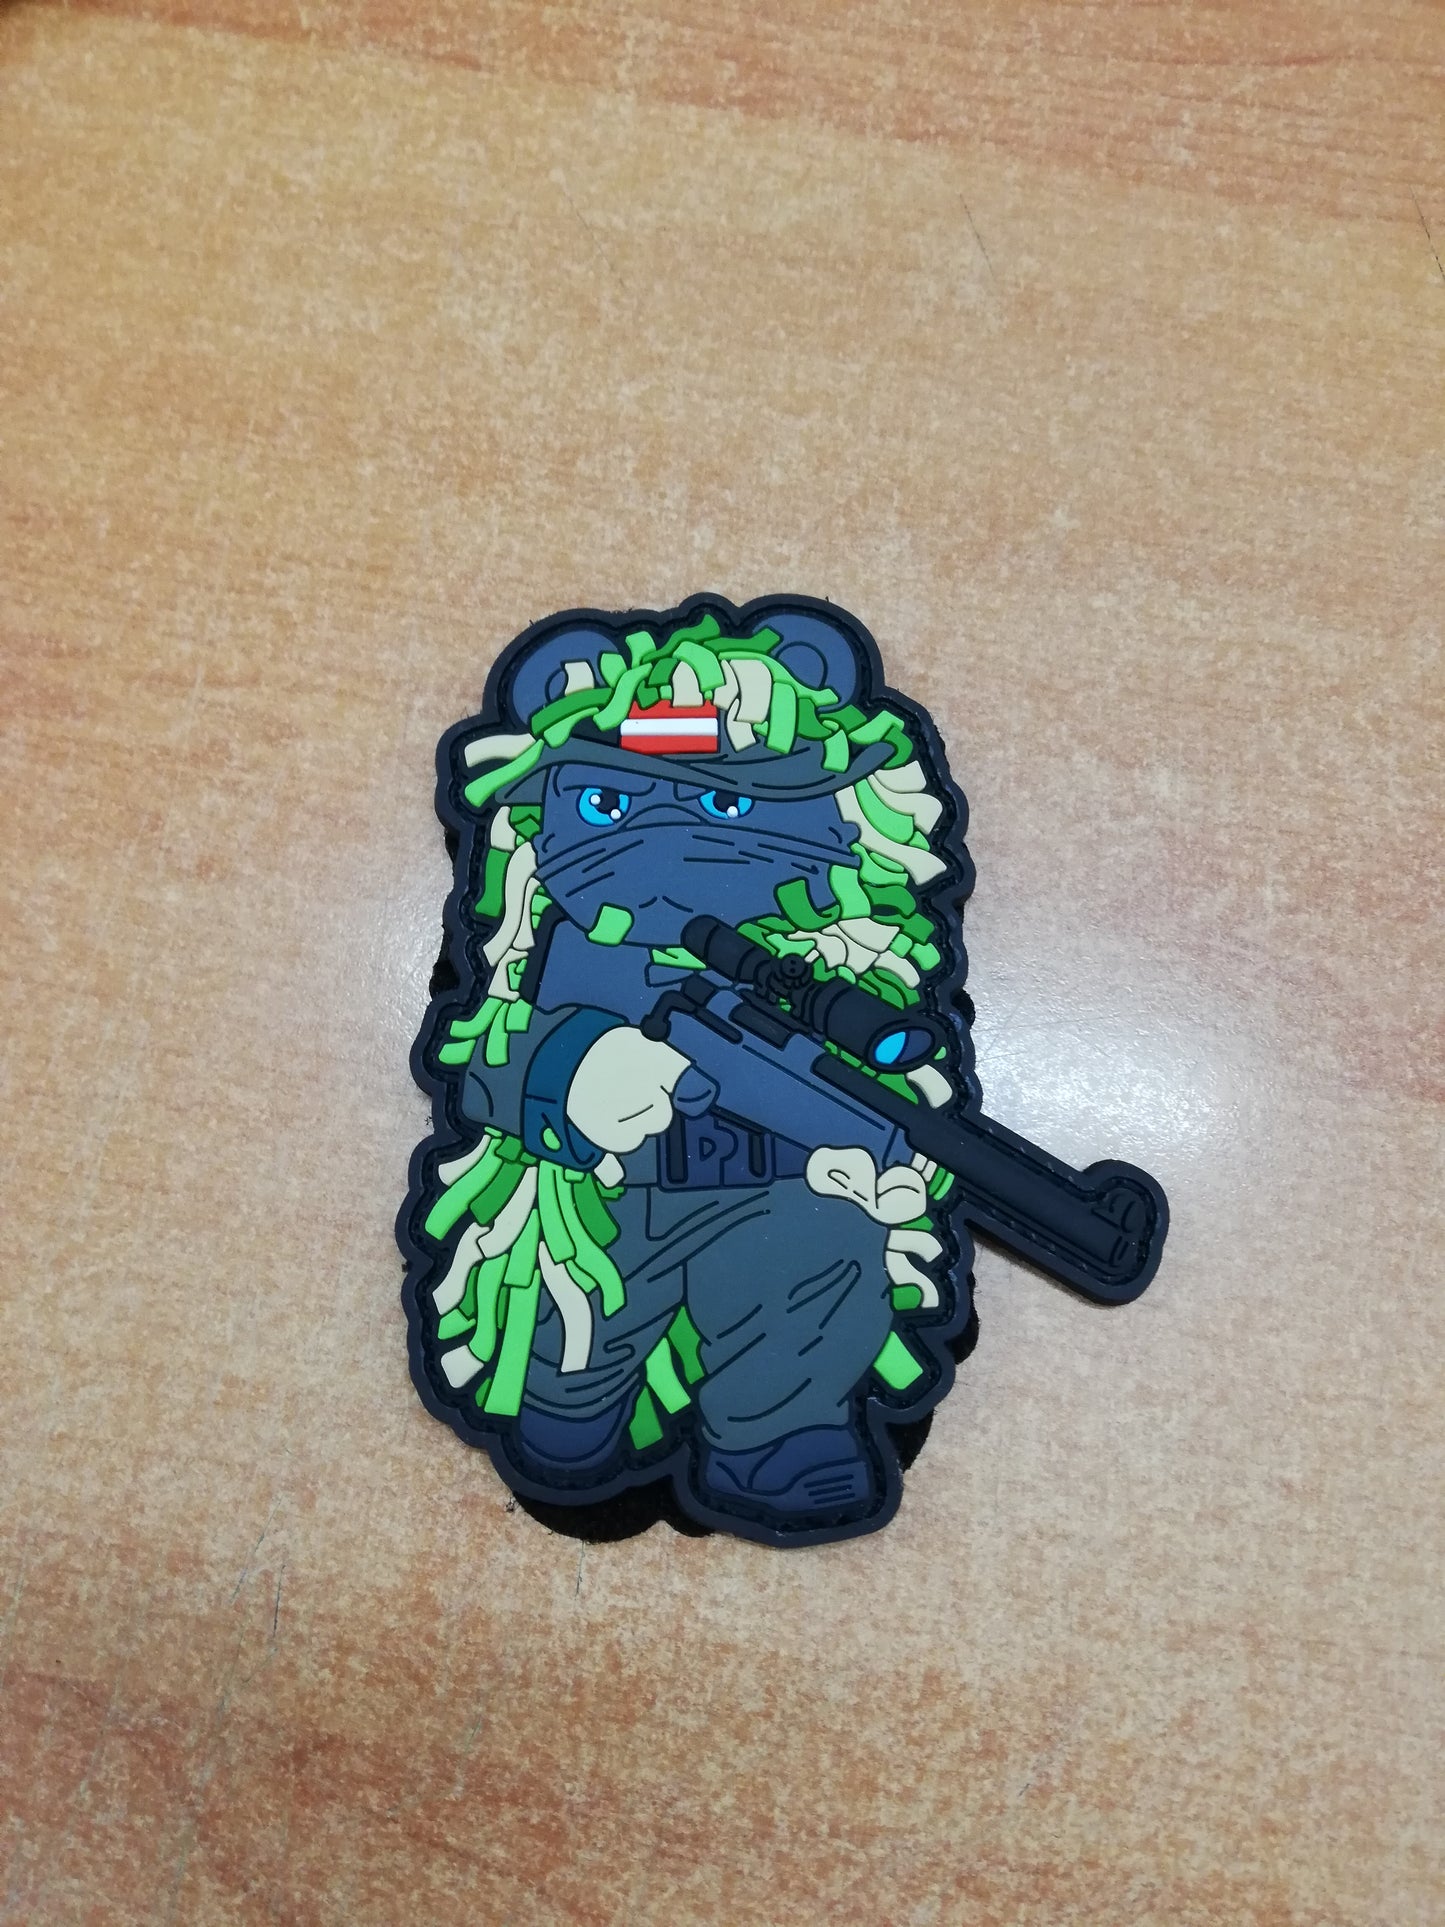 Amped Patch  HPA Powered PVC Velcro Morale Patch